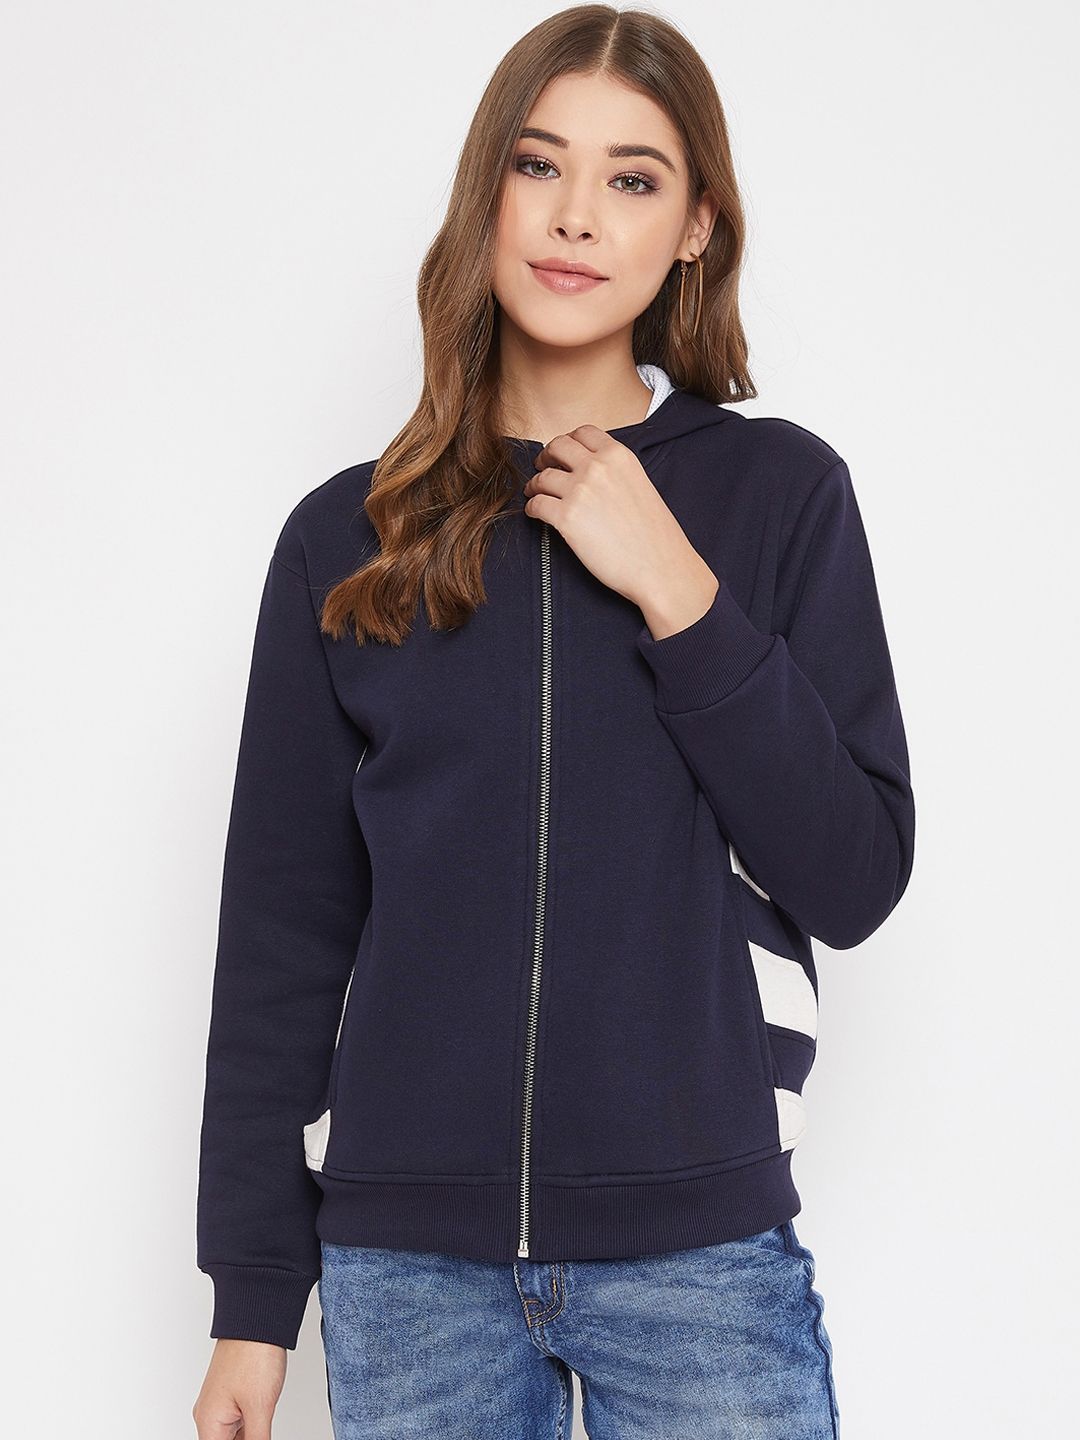 AGIL ATHLETICA Women Navy Blue Solid Tailored Jacket Price in India